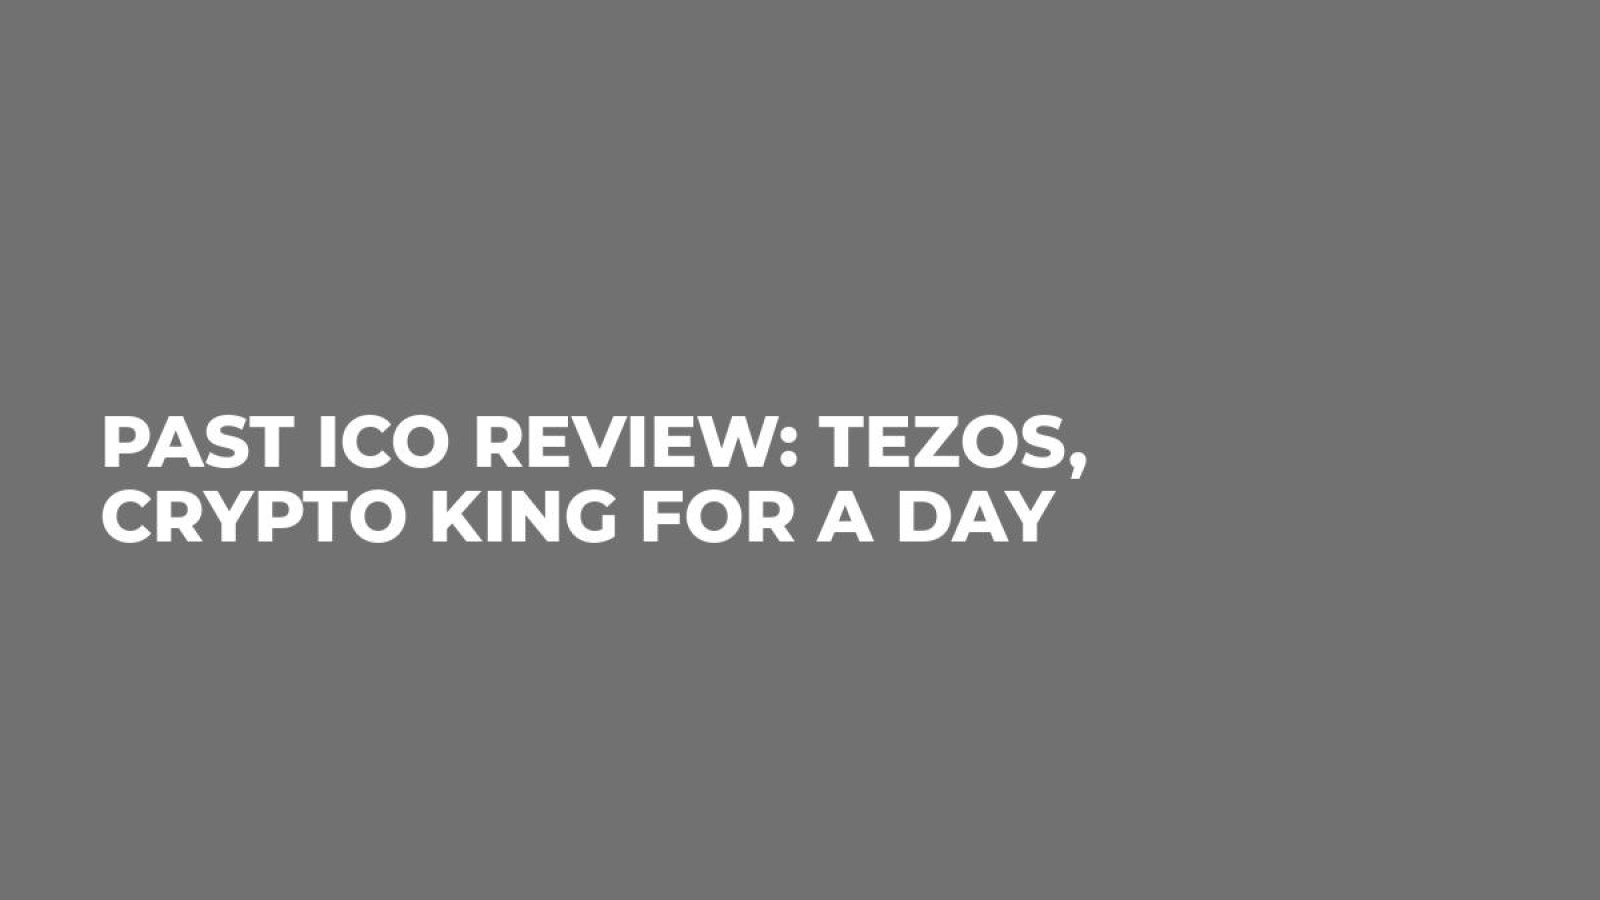 Past ICO Review: Tezos, Crypto King for a Day